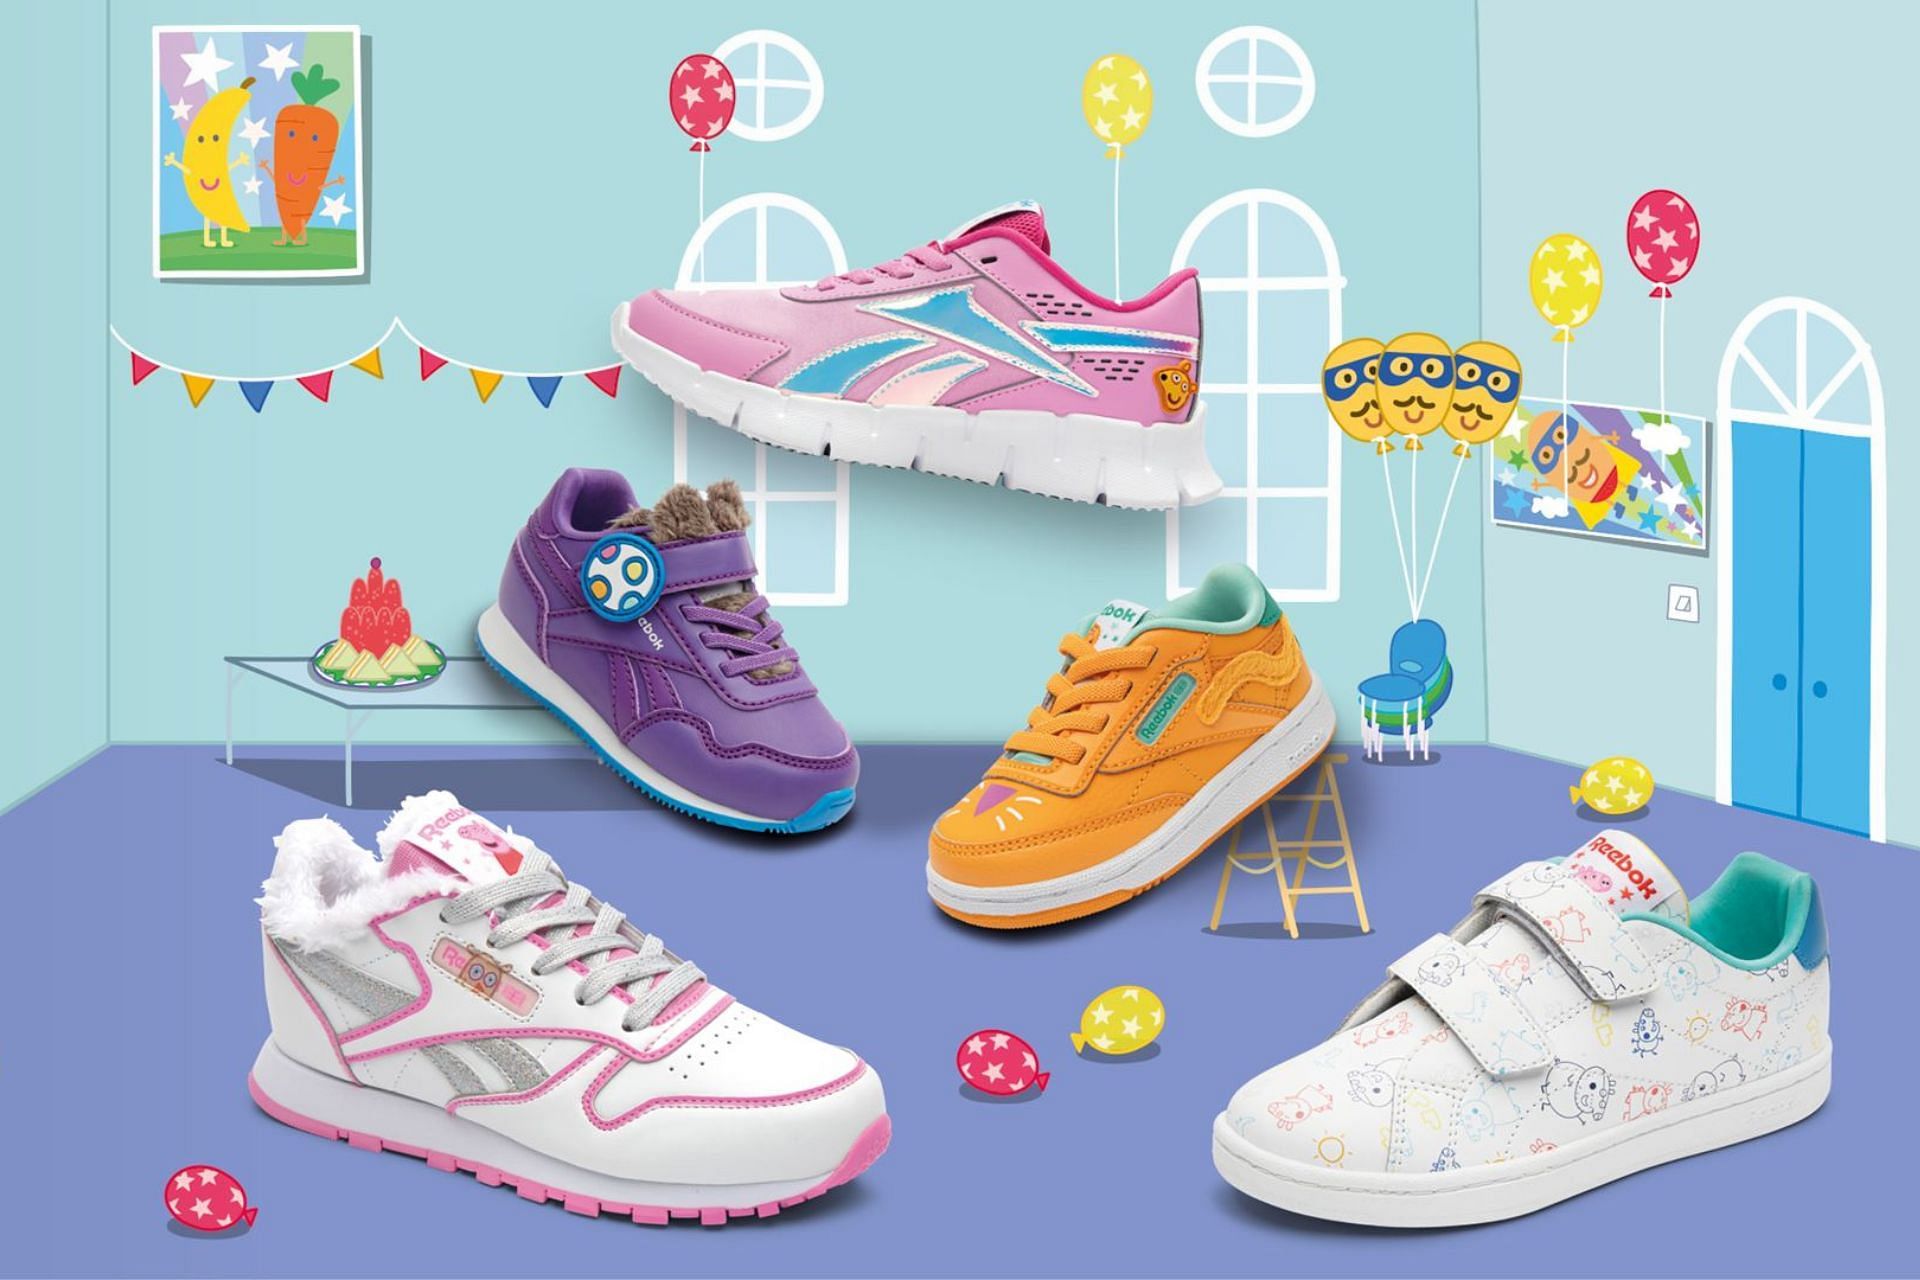 Where to buy the Reebok x Peppa Pig collection? Price, release date,